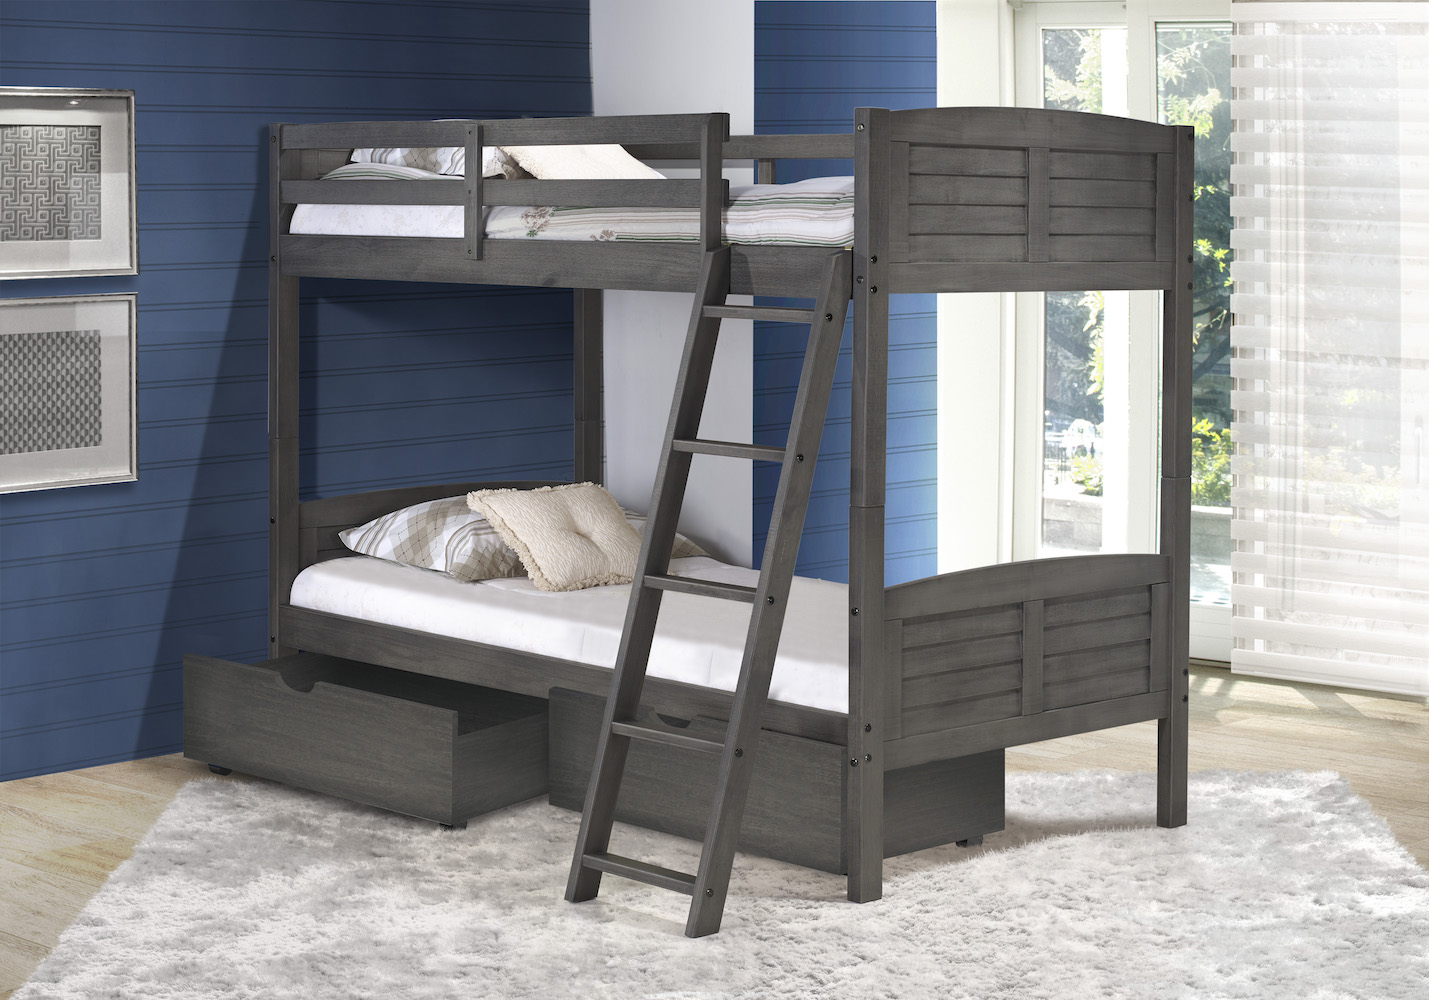 Donco Trading Co Import Whole, Donco Bunk Bed